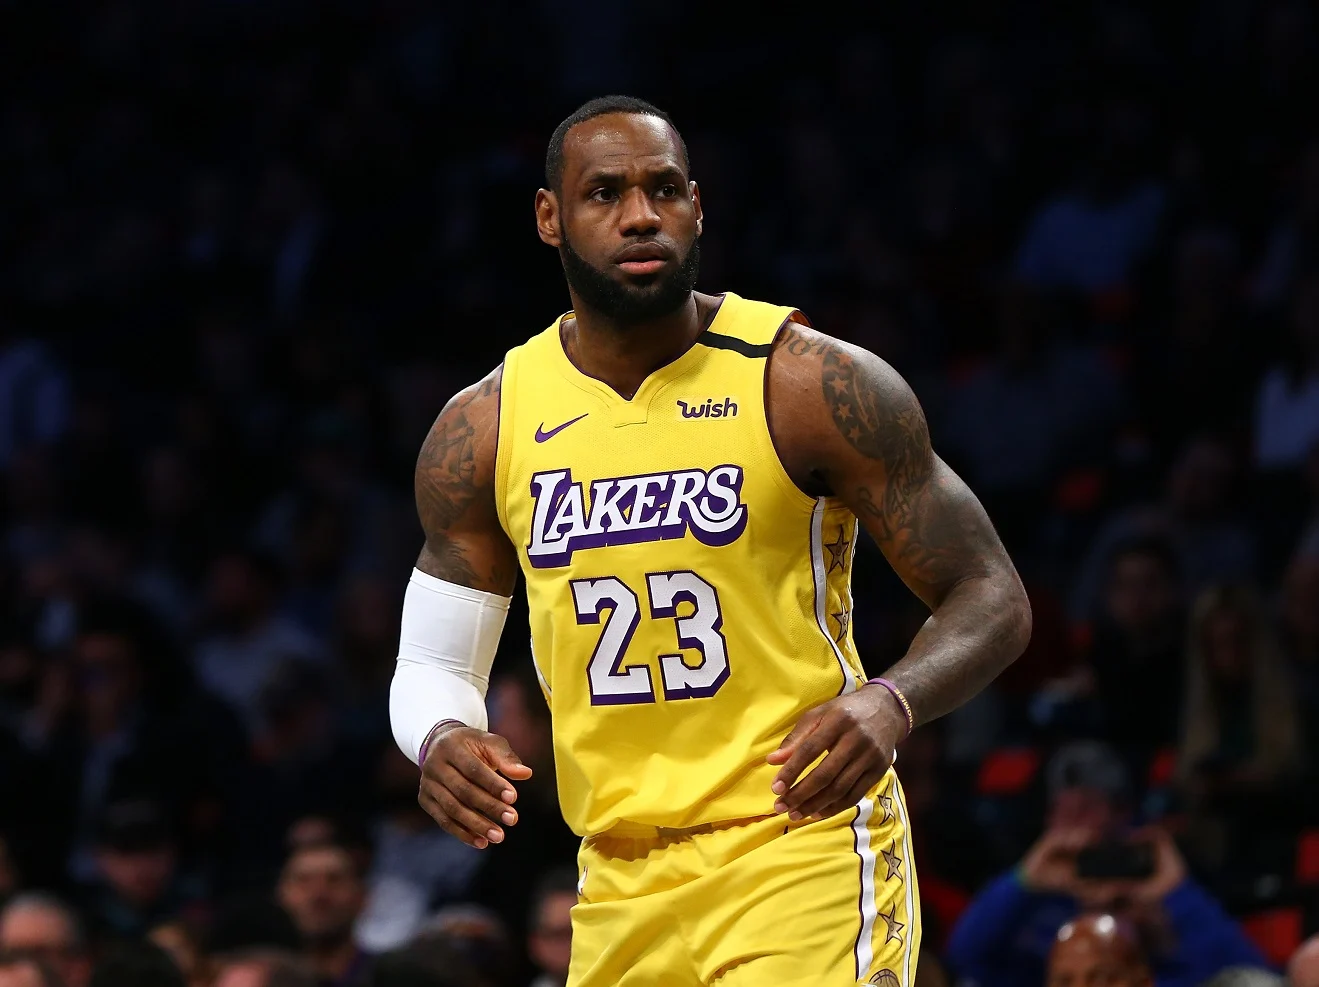 Lebron Jame's Net Worth, Career, Investments and Personal Life